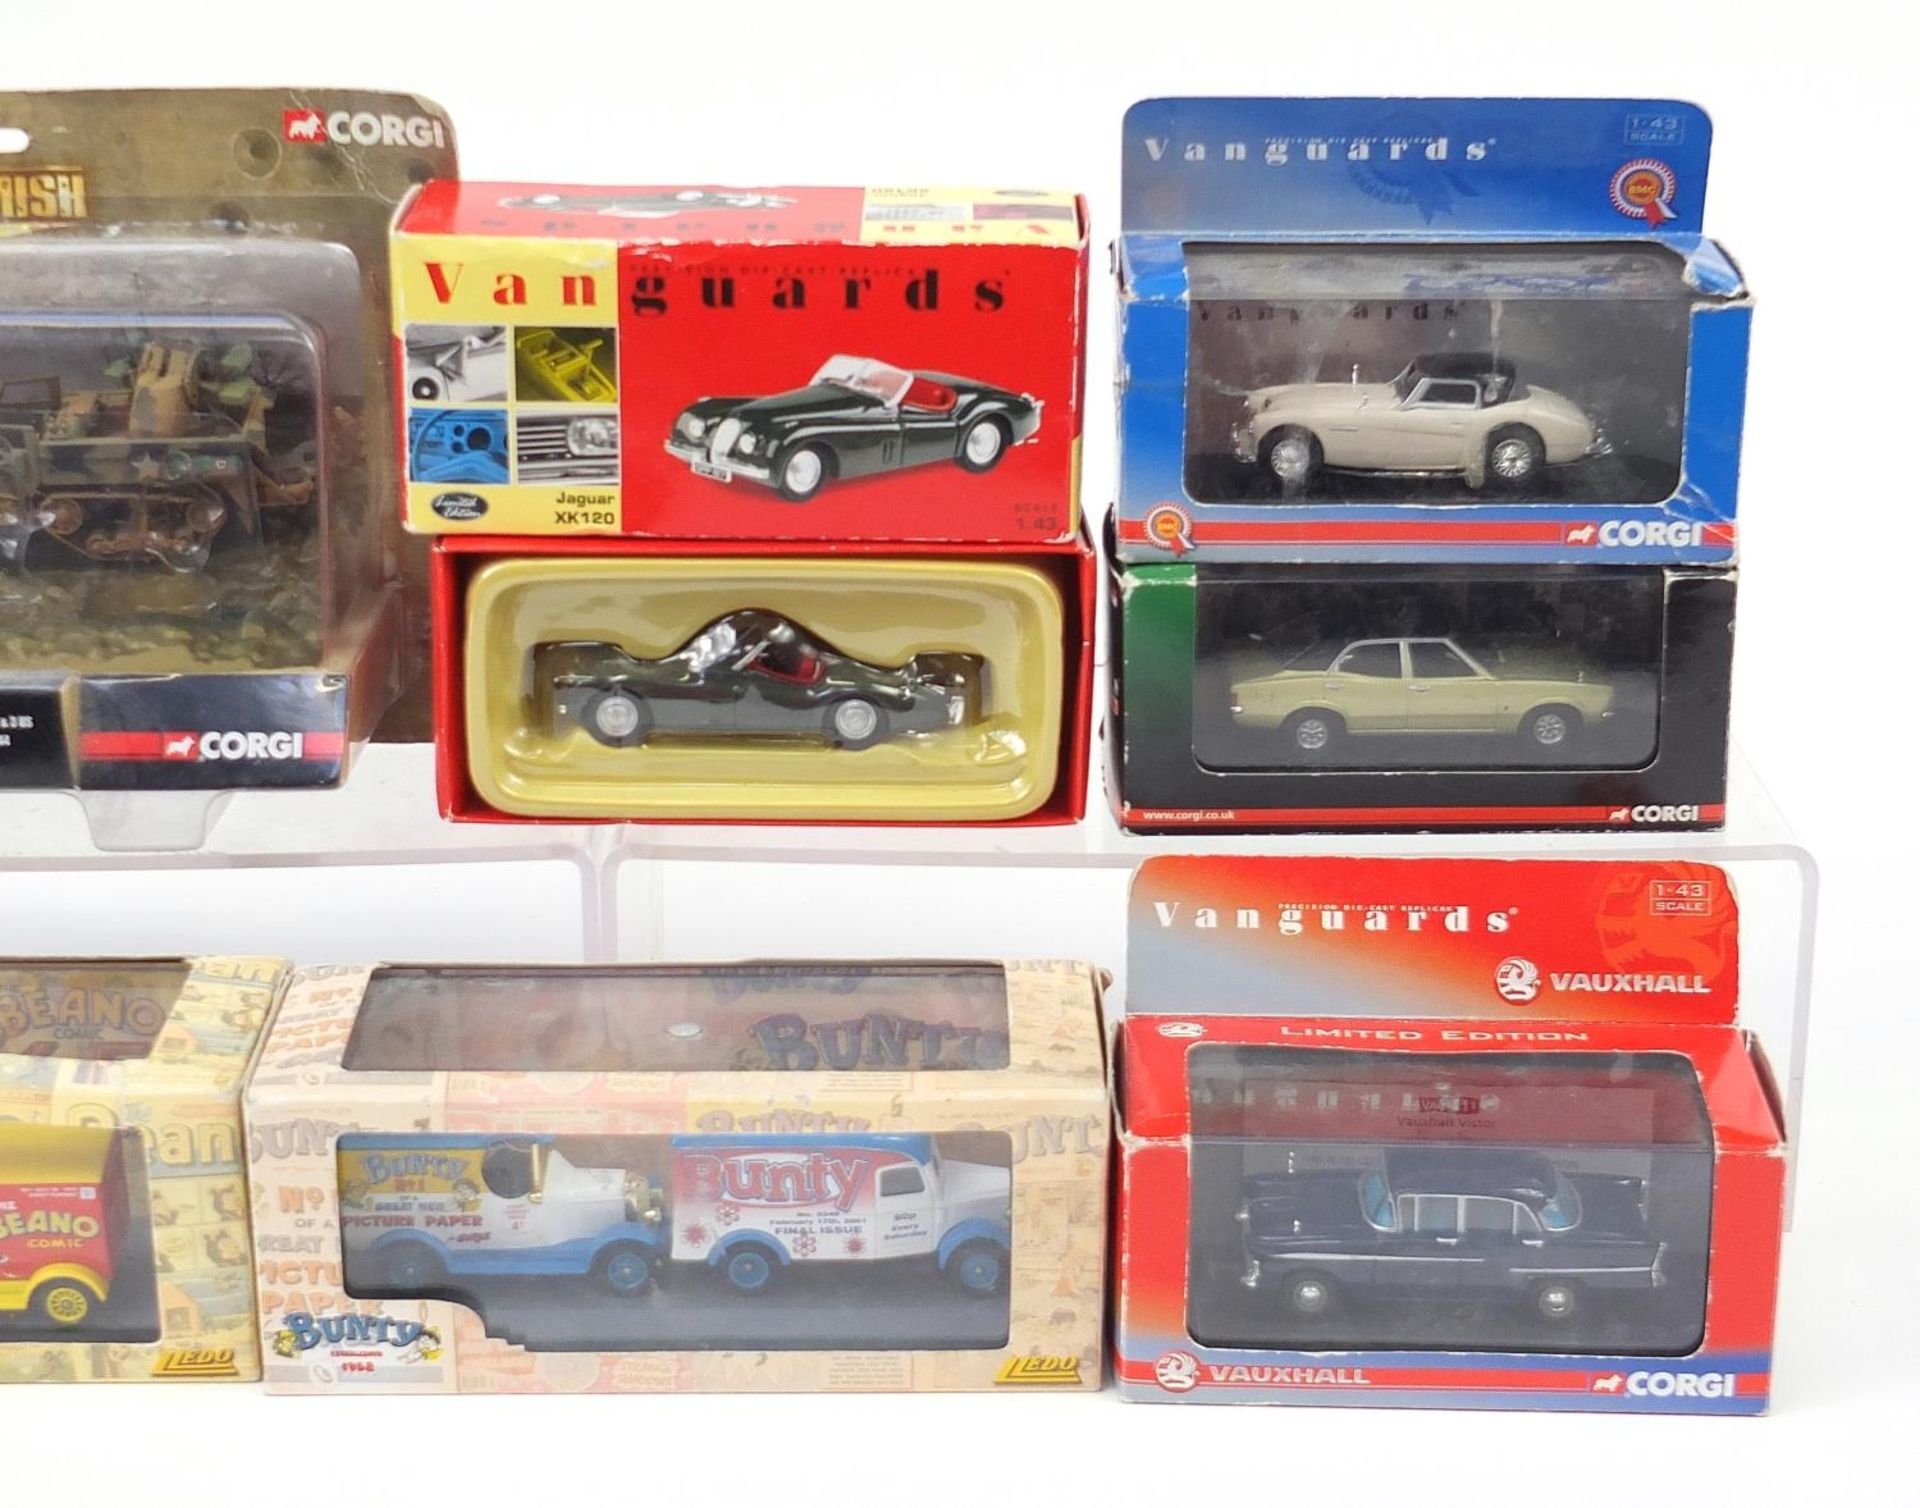 Diecast vehicles in boxes including Lledo Beano, Corgi Skirmish and Vanguards - Image 3 of 3